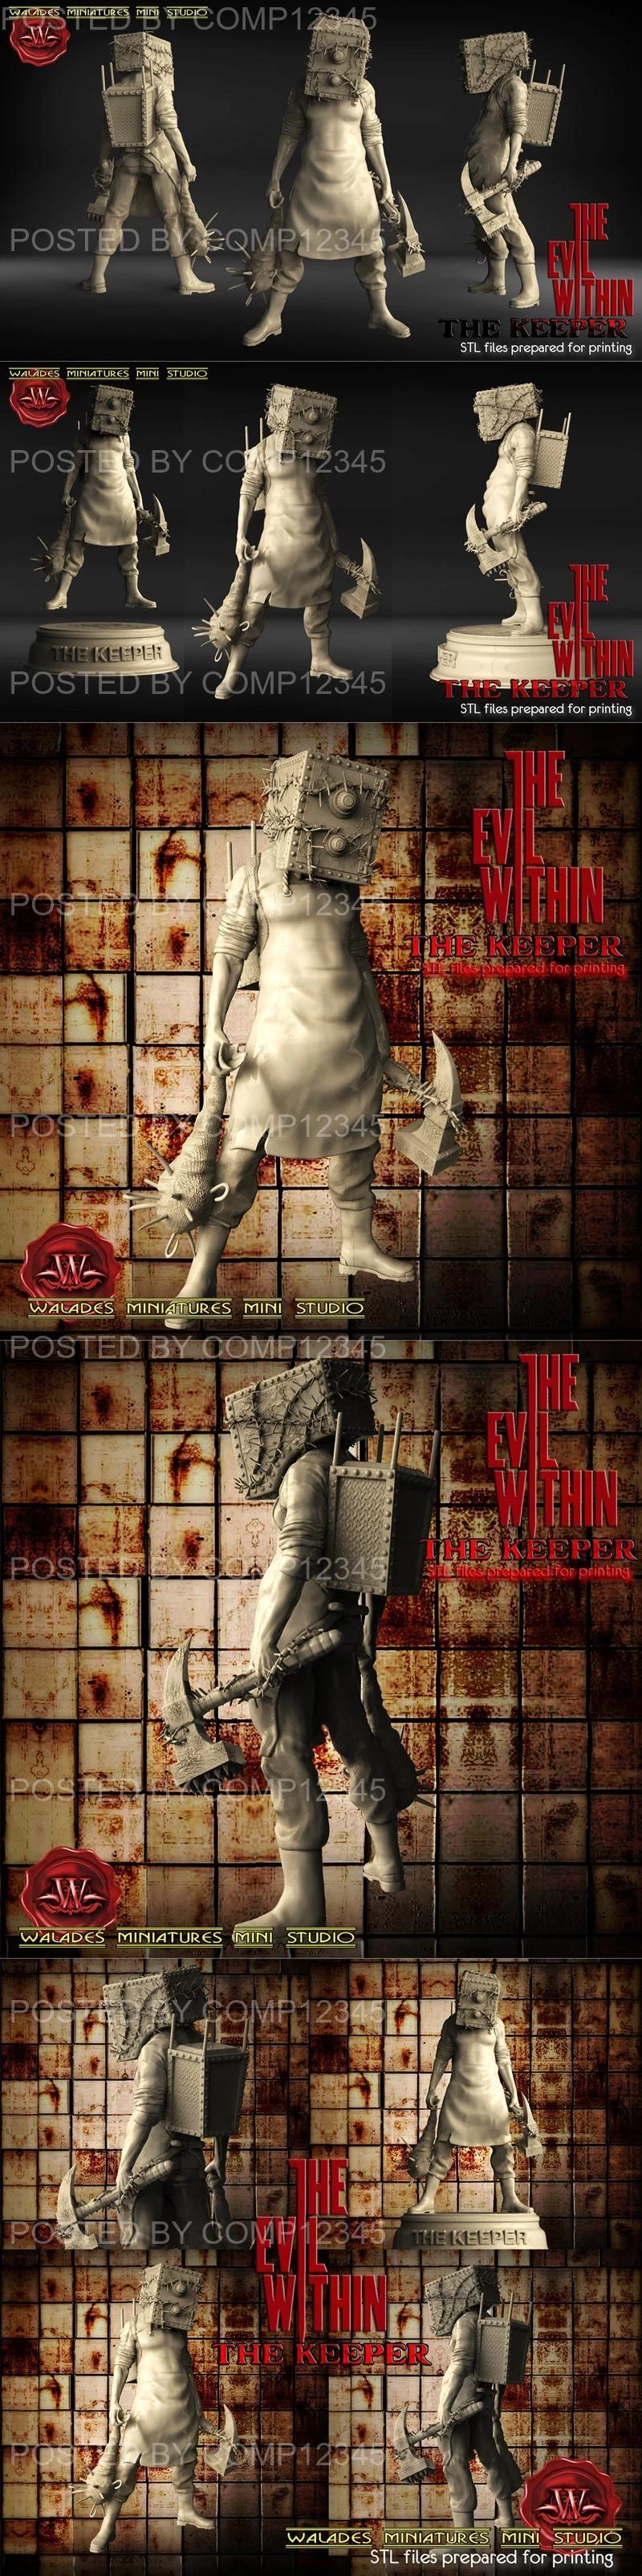 Walades Studio - The Keeper Evil within